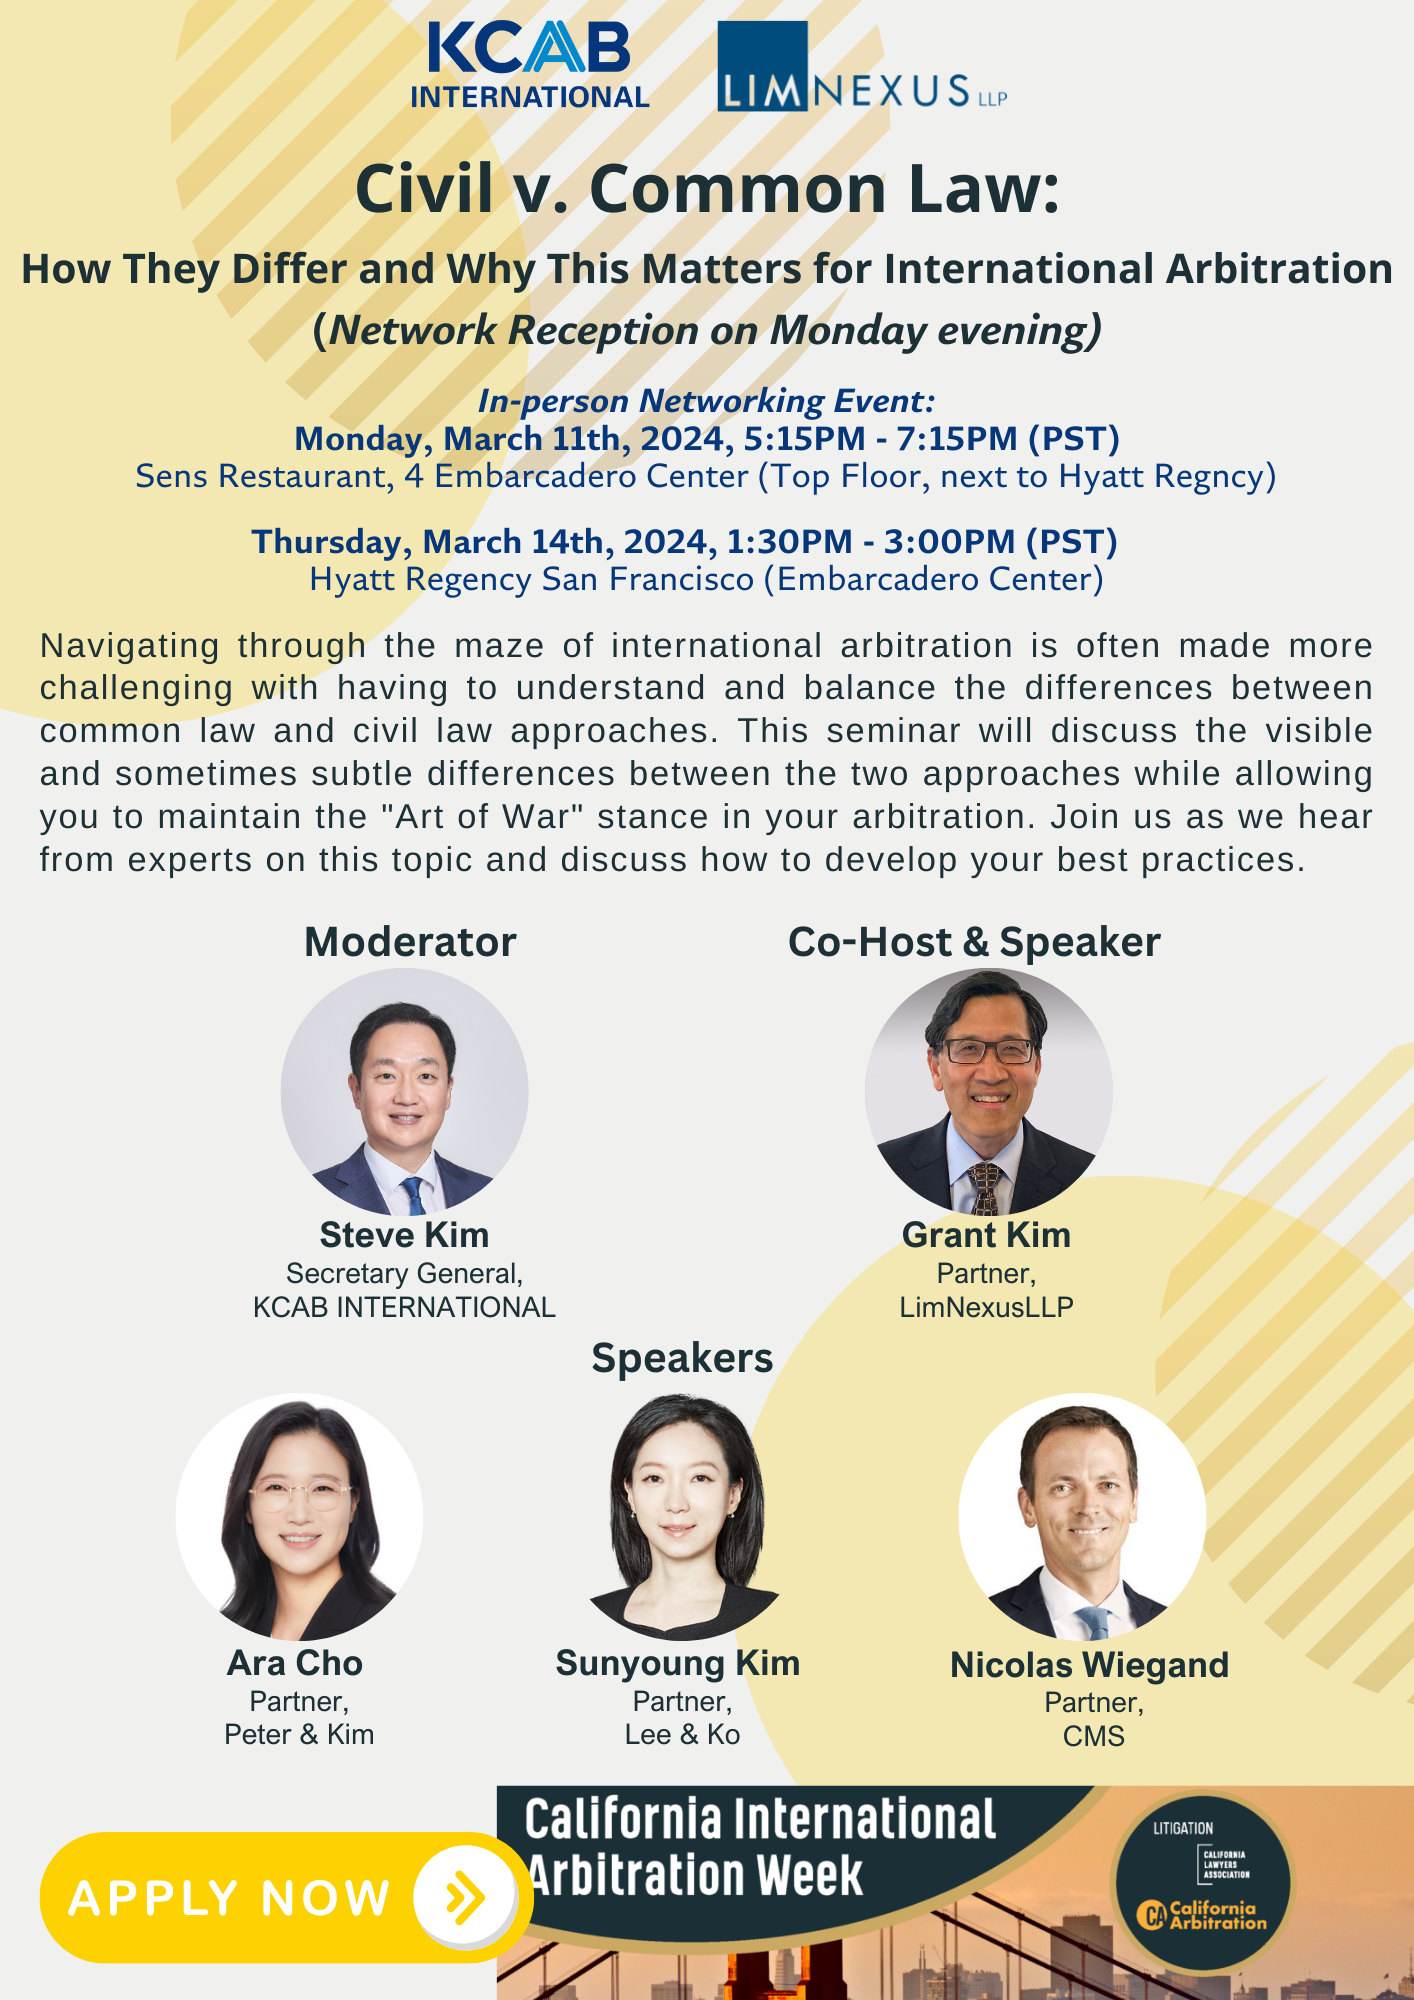 [California International Arbitration Week 2024] Civil v. Common Law : How They Differ and Why This Matters for International Arbitration